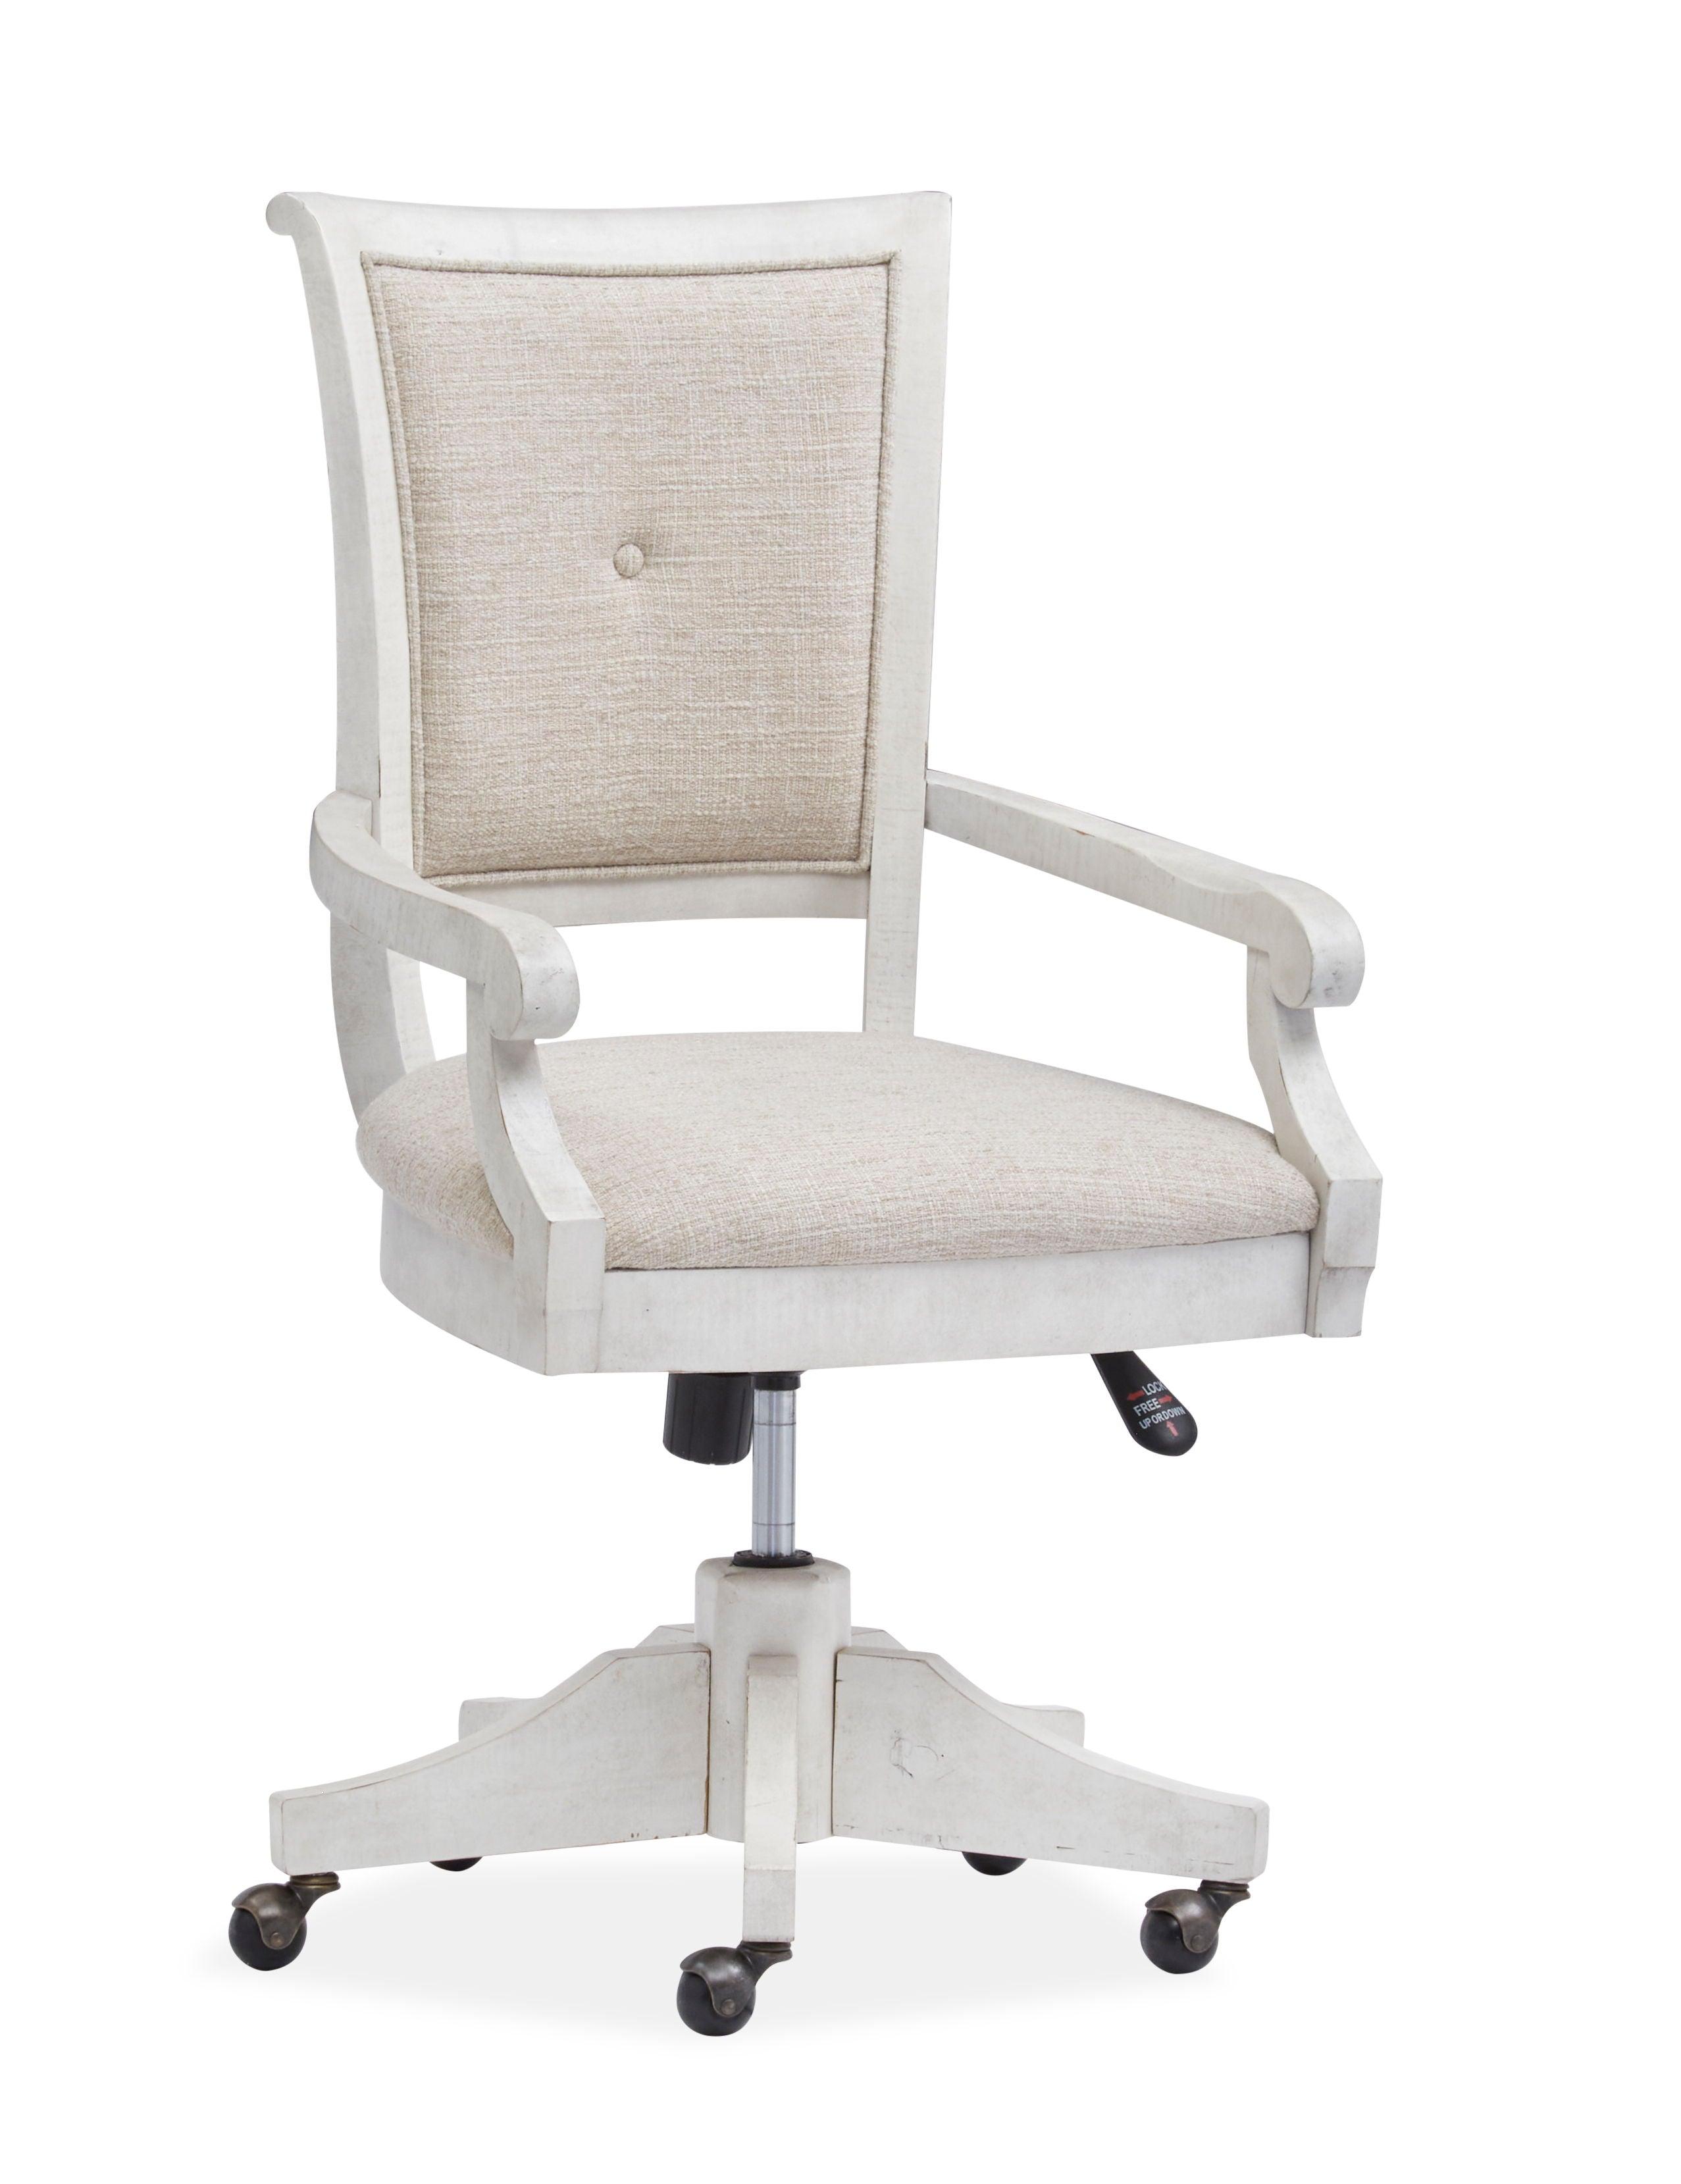 Magnussen Furniture - Newport - Fully Upholstered Swivel Chair - Alabaster - 5th Avenue Furniture